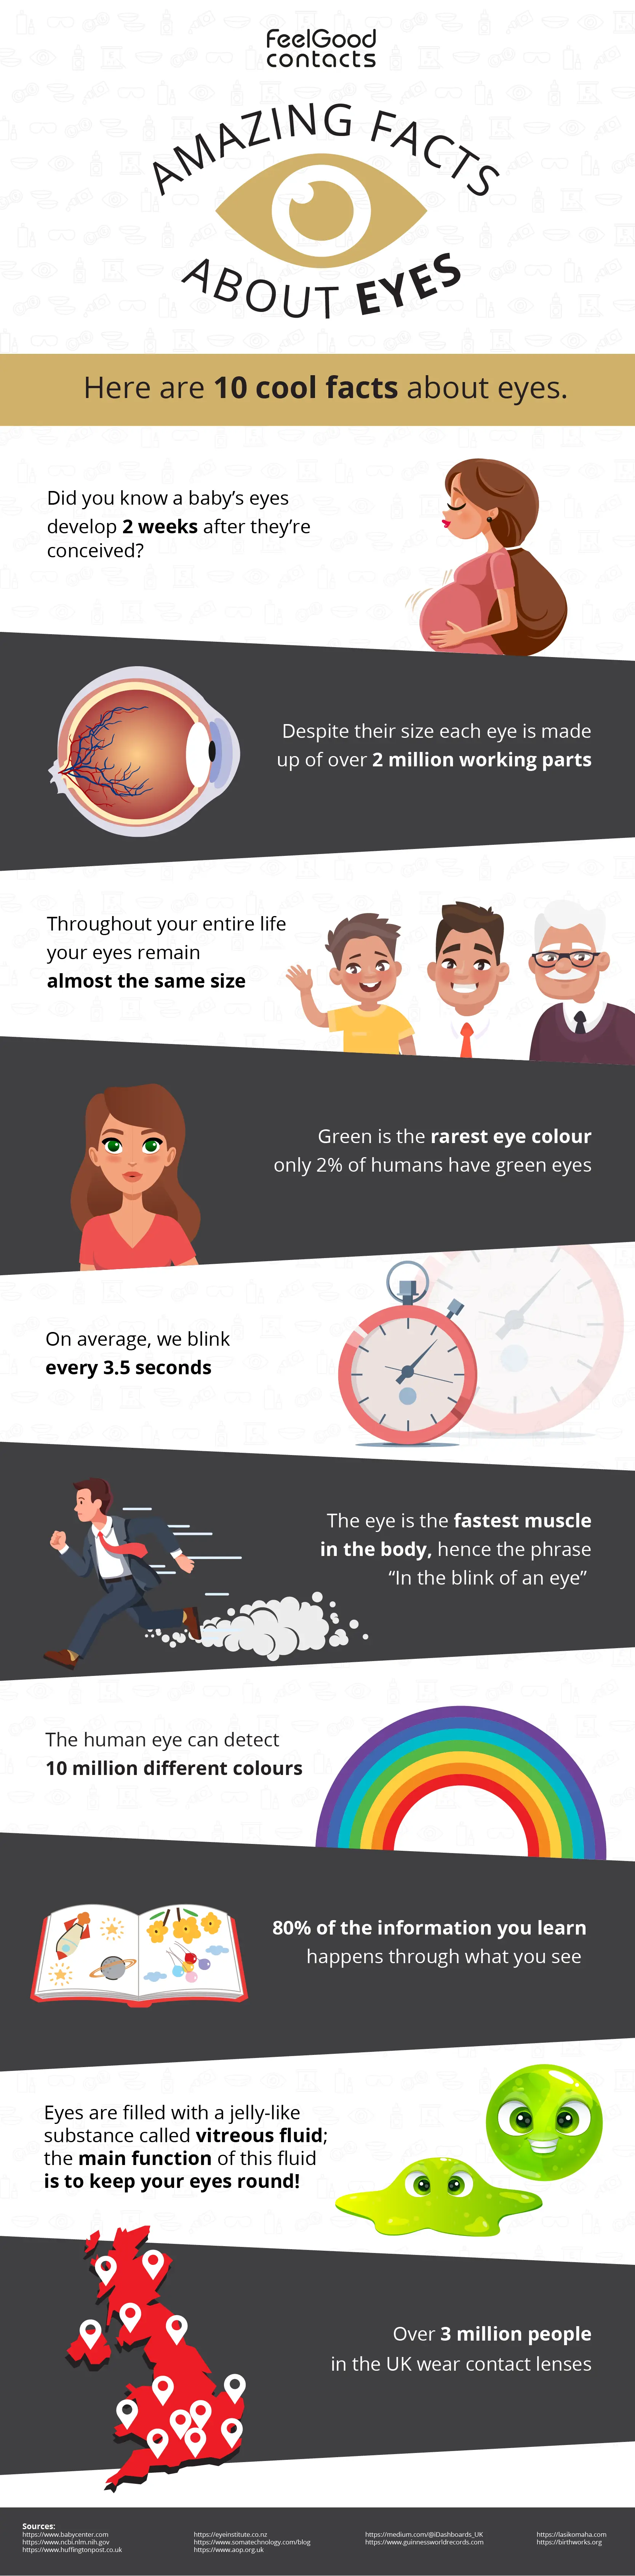 eye facts infographic updated